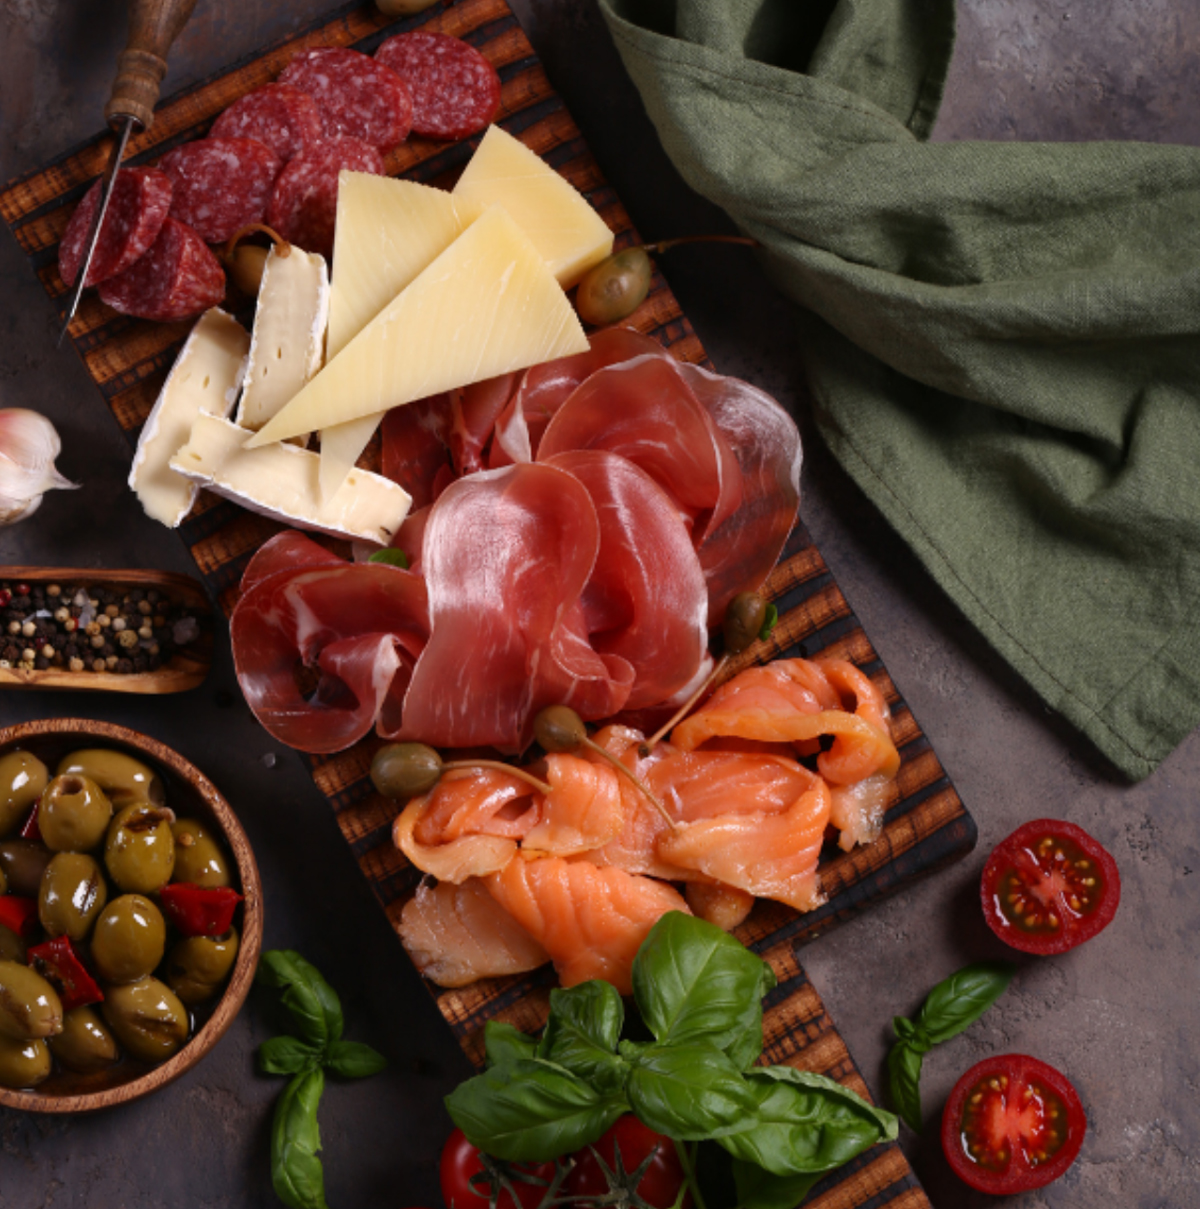 BluGlacier's charcuterie board is filled with salmon, meats, olives, and cheese.